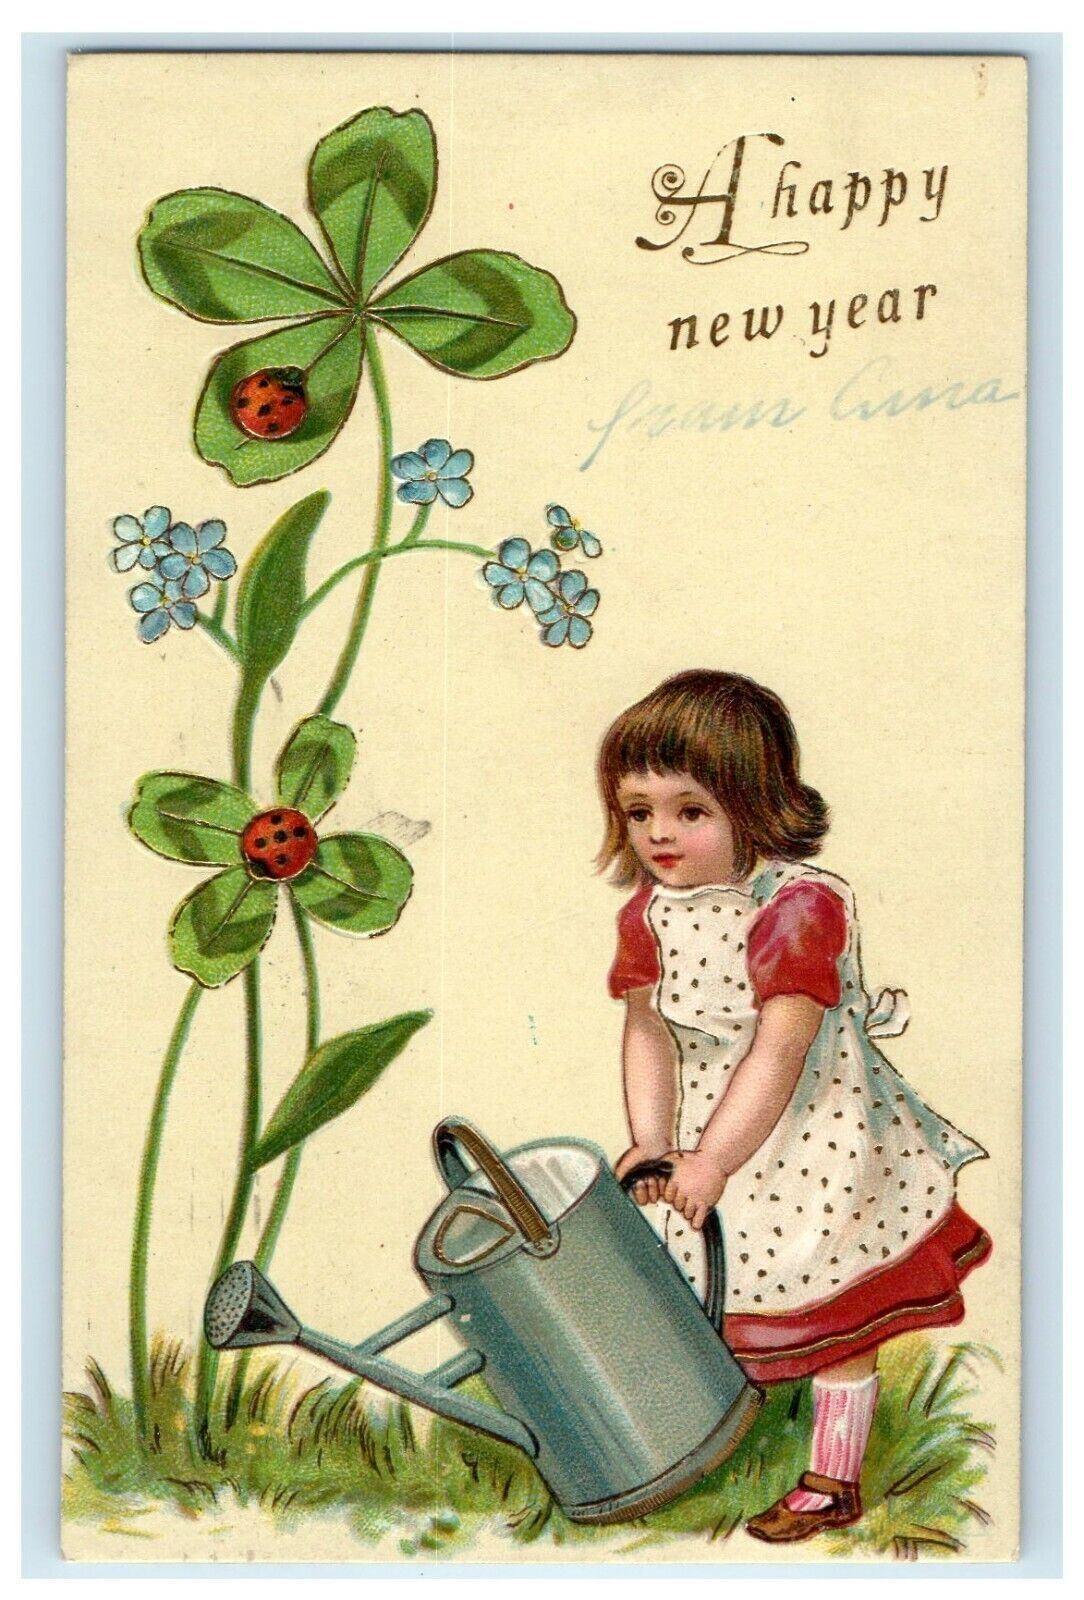 c1905 New Year Ladybug Clover Watering Can Little Girl In Dress Antique Postcard